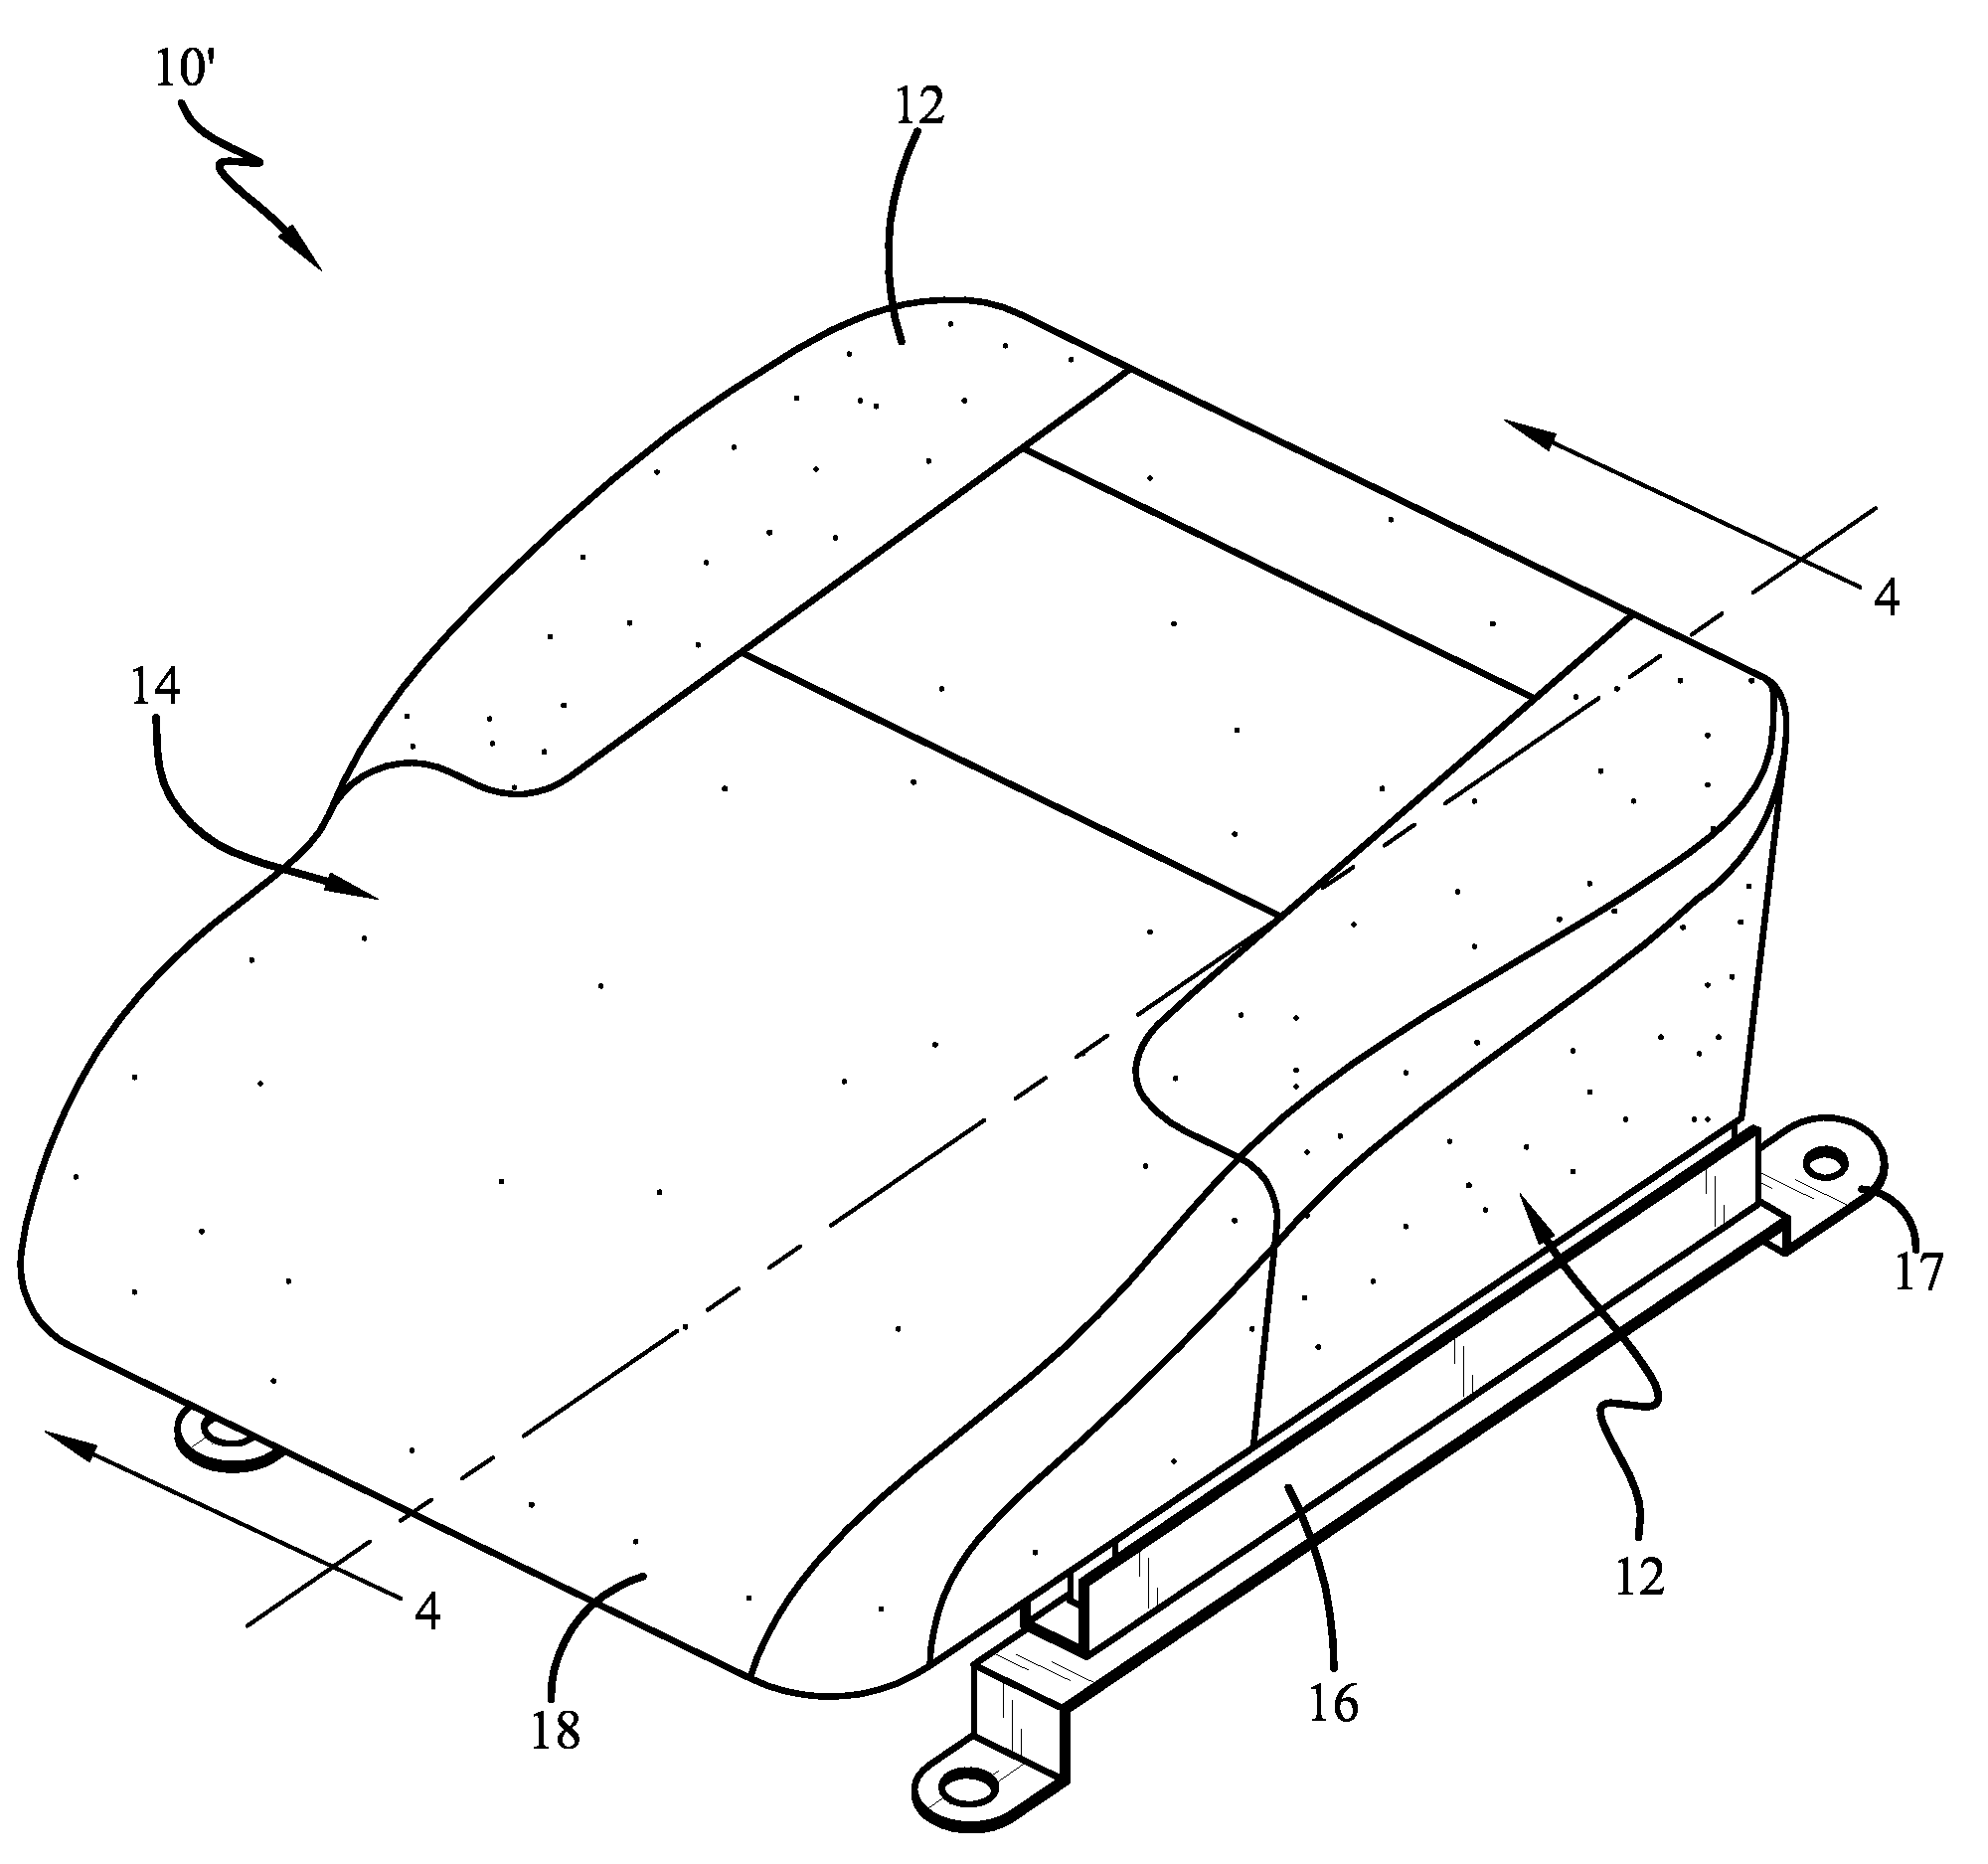 Adjustable Thigh Support for Automobile Seat Via Adjustment Plate